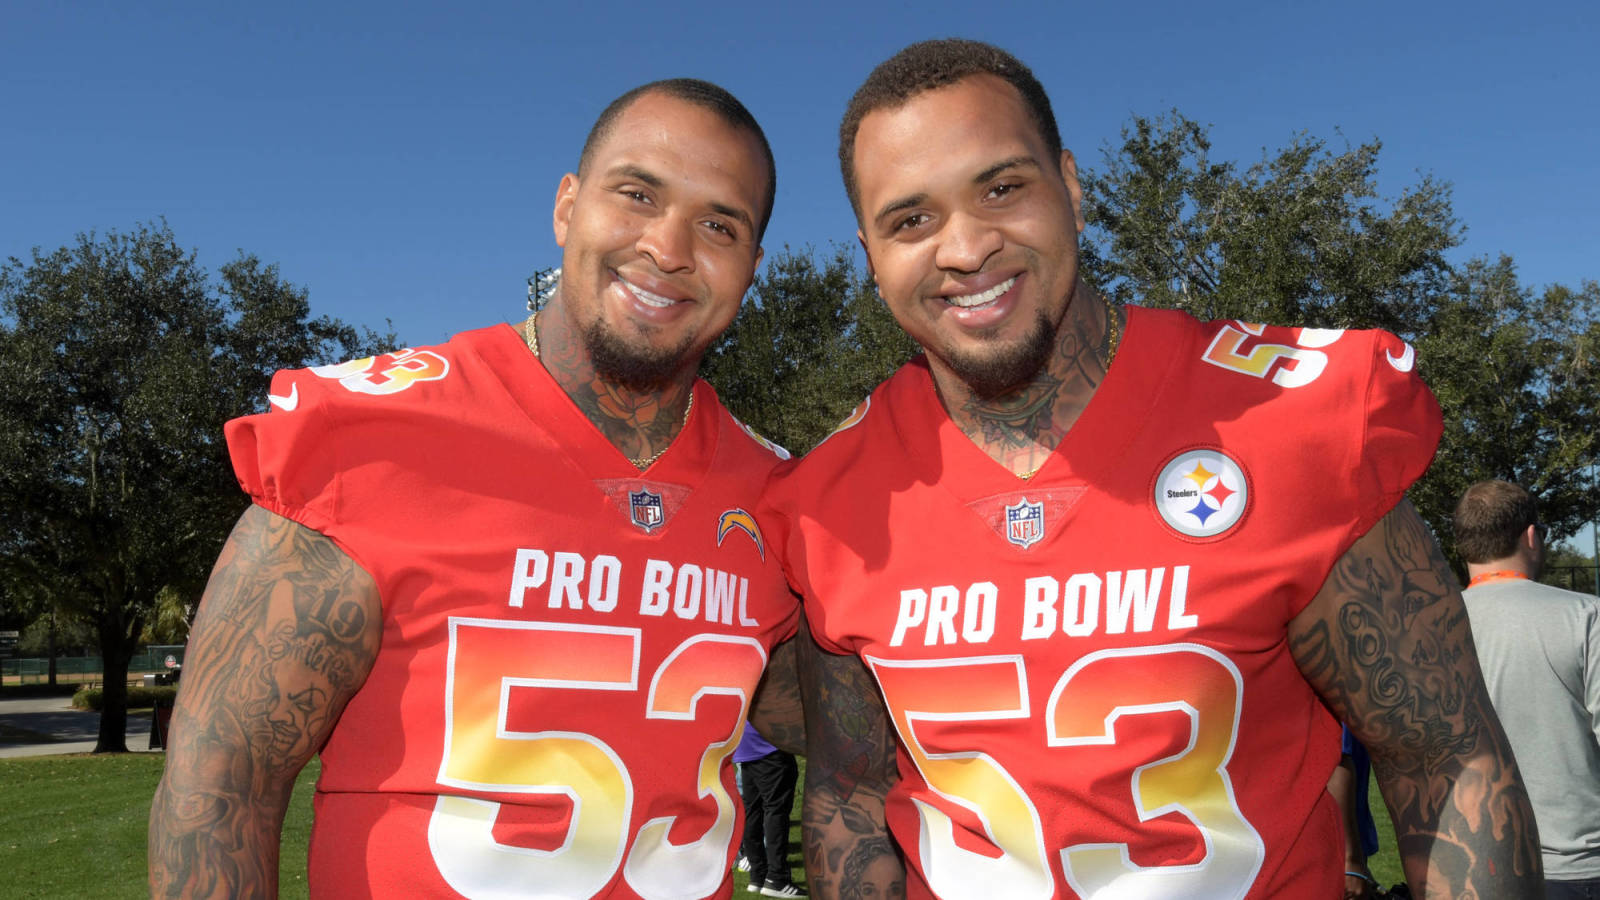 Twins Maurkice and Mike Pouncey Announce Retirement from NFL